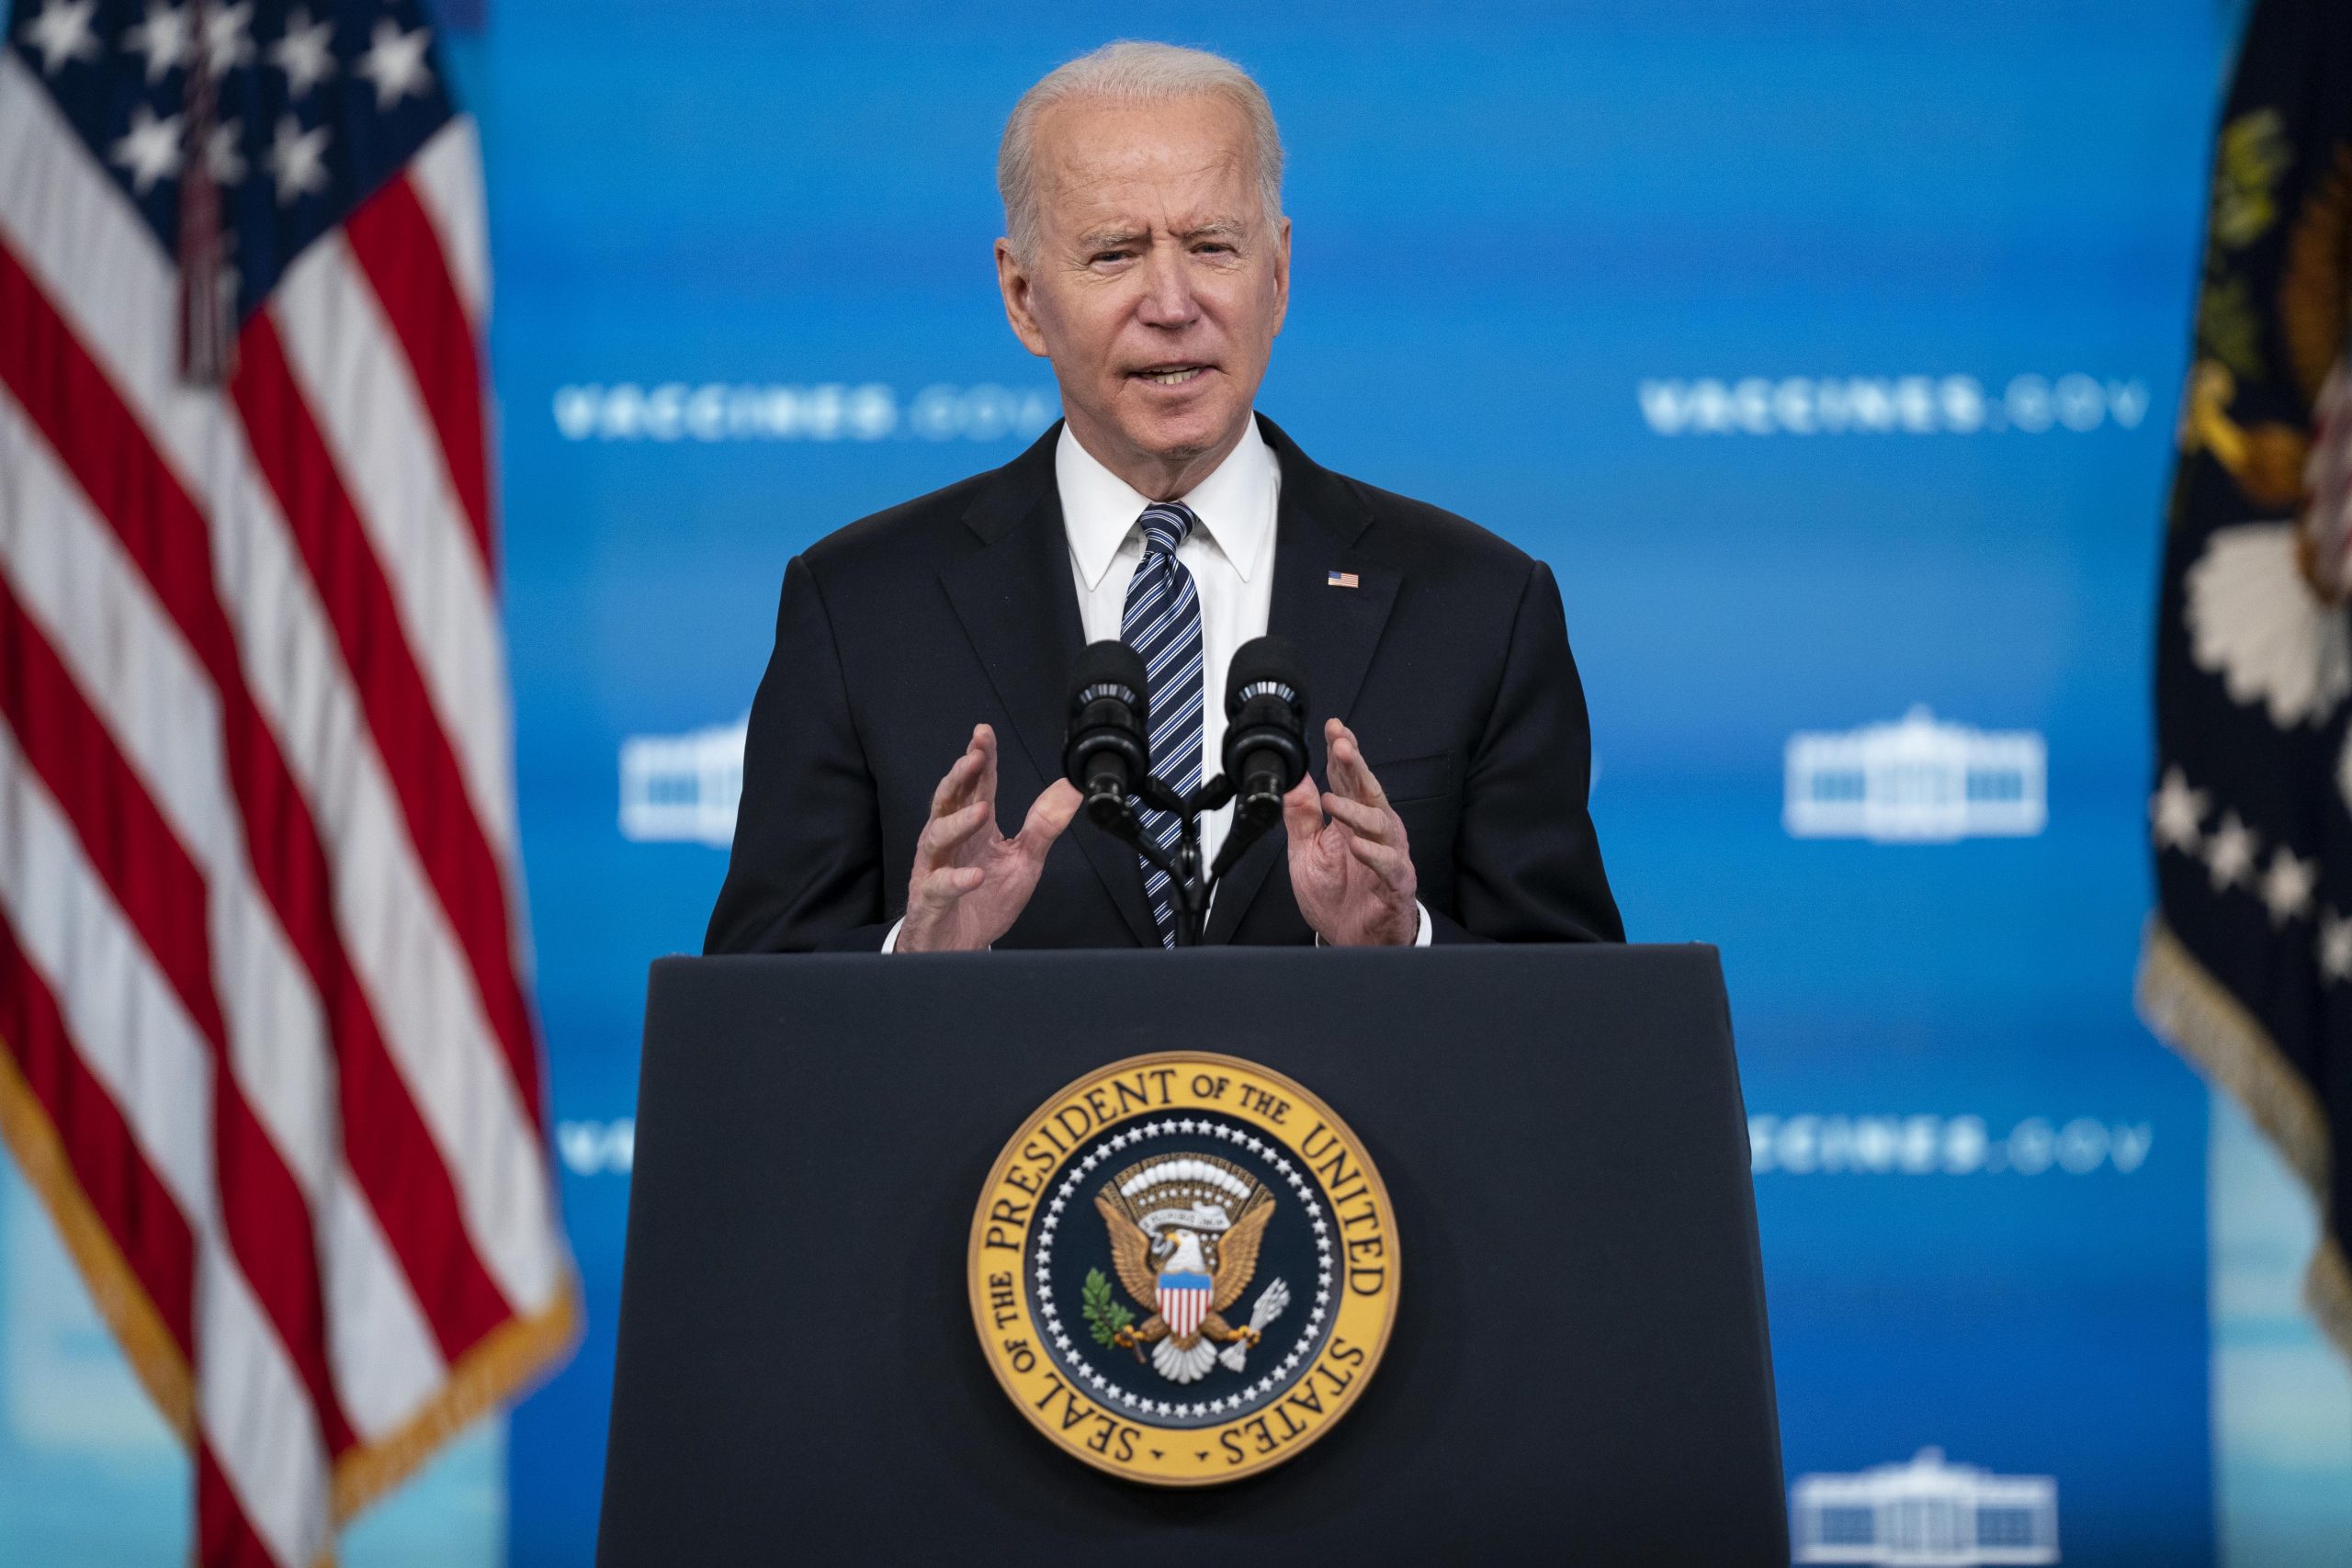 Diplomacy, Iron Dome and Egypt: Biden’s remarks on Israel-Hamas ceasefire